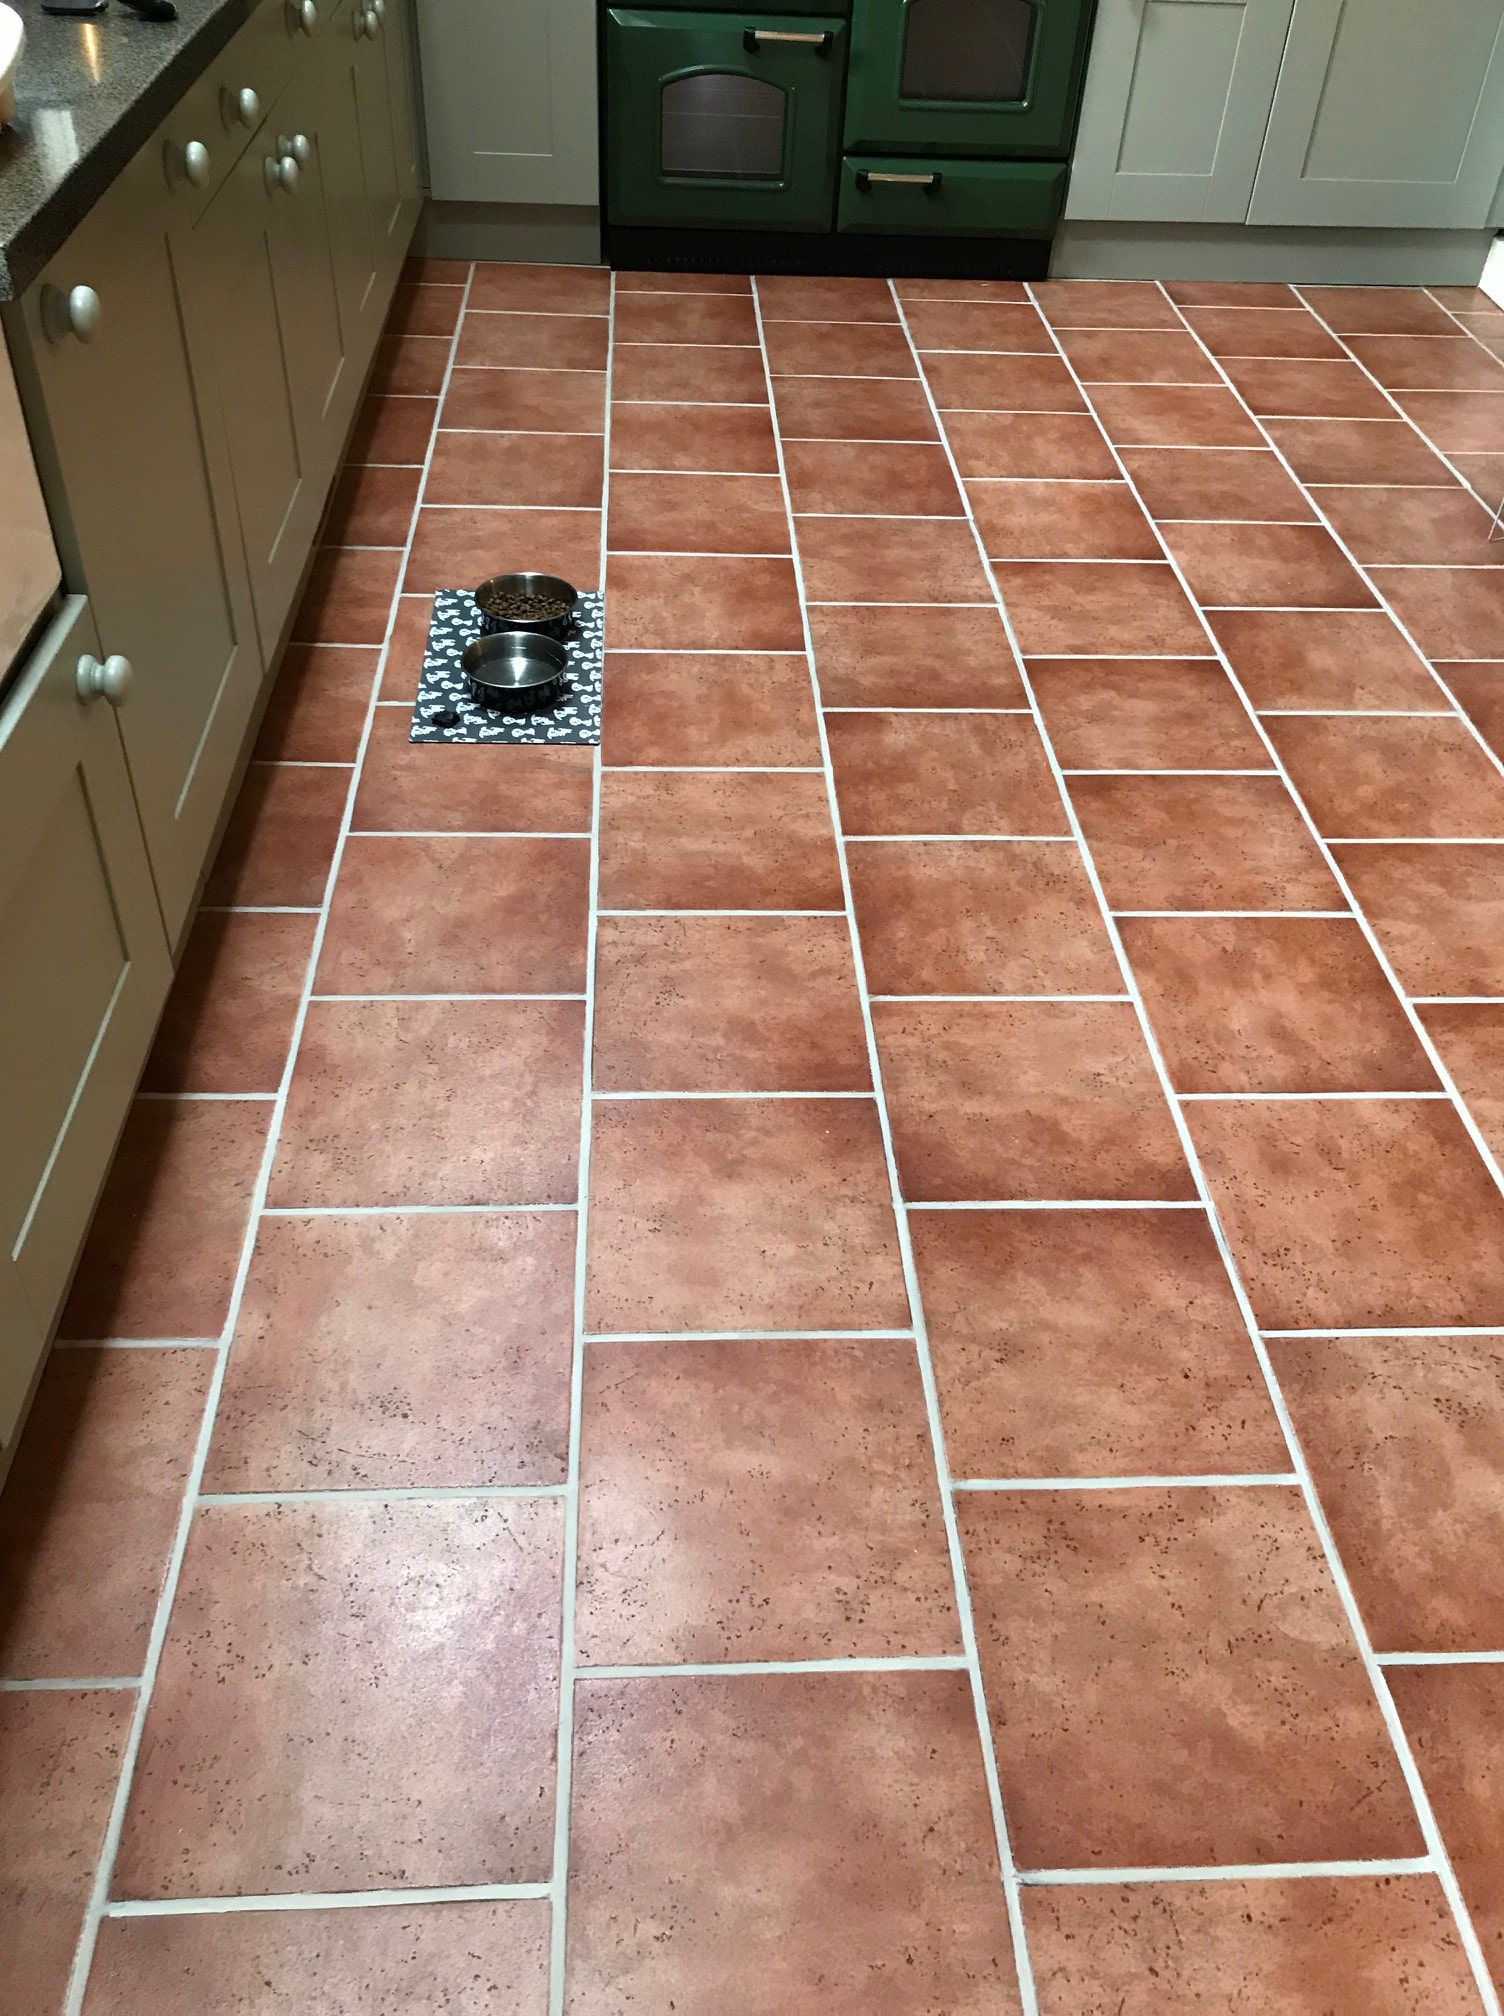 Ceramic Tiled Kitchen Floor After Grout Colouring Ulverston